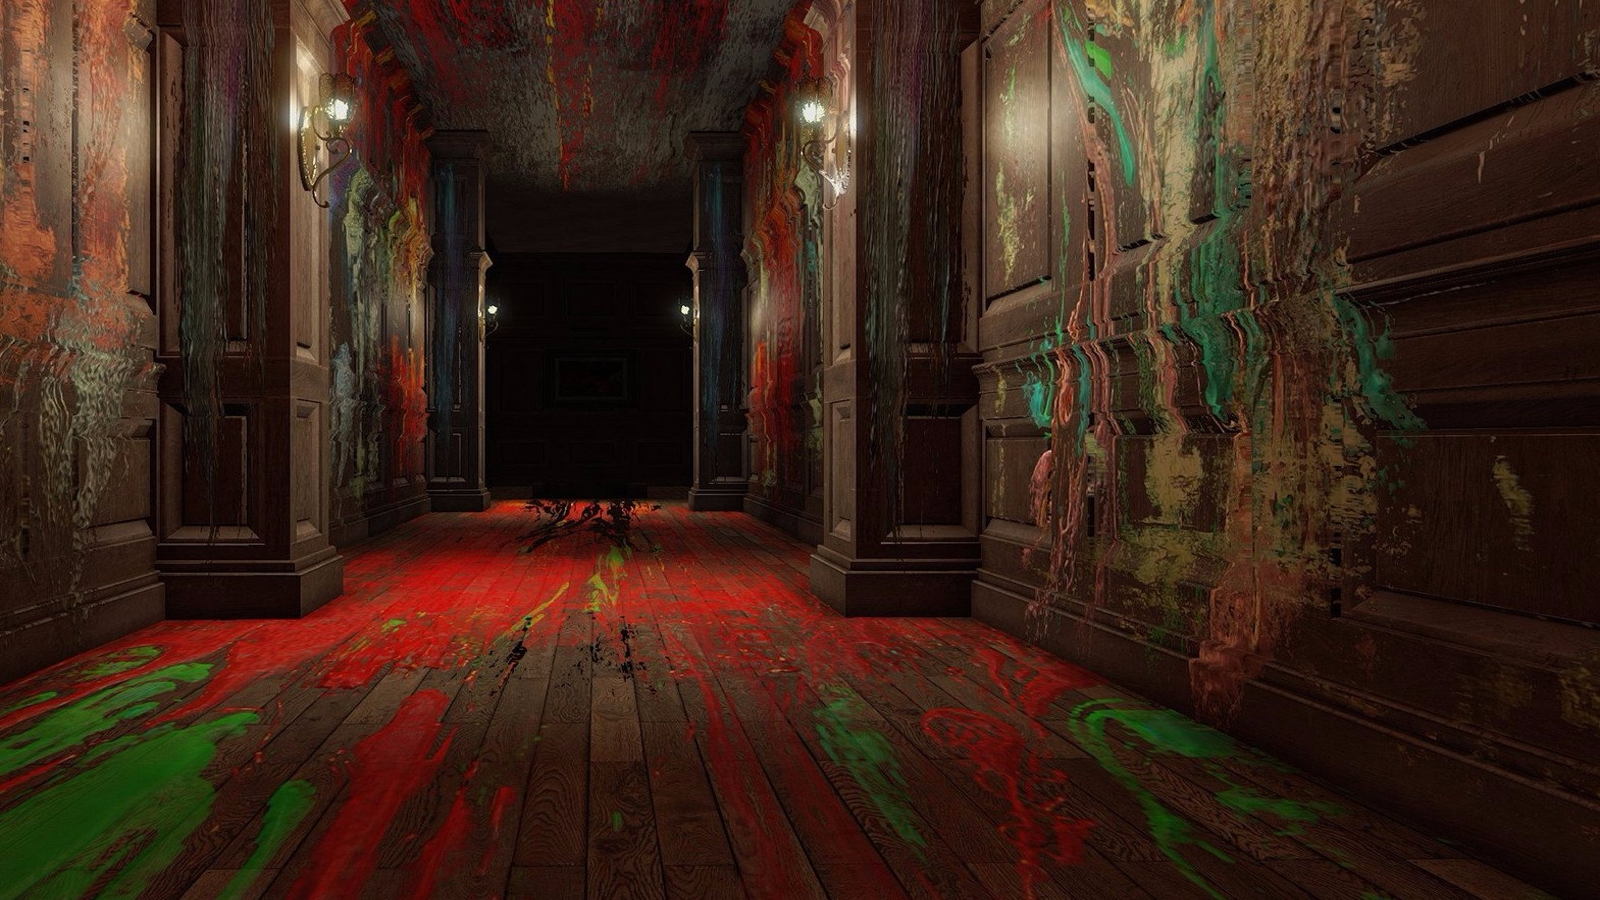 Layers Of Fear Review - Finish It